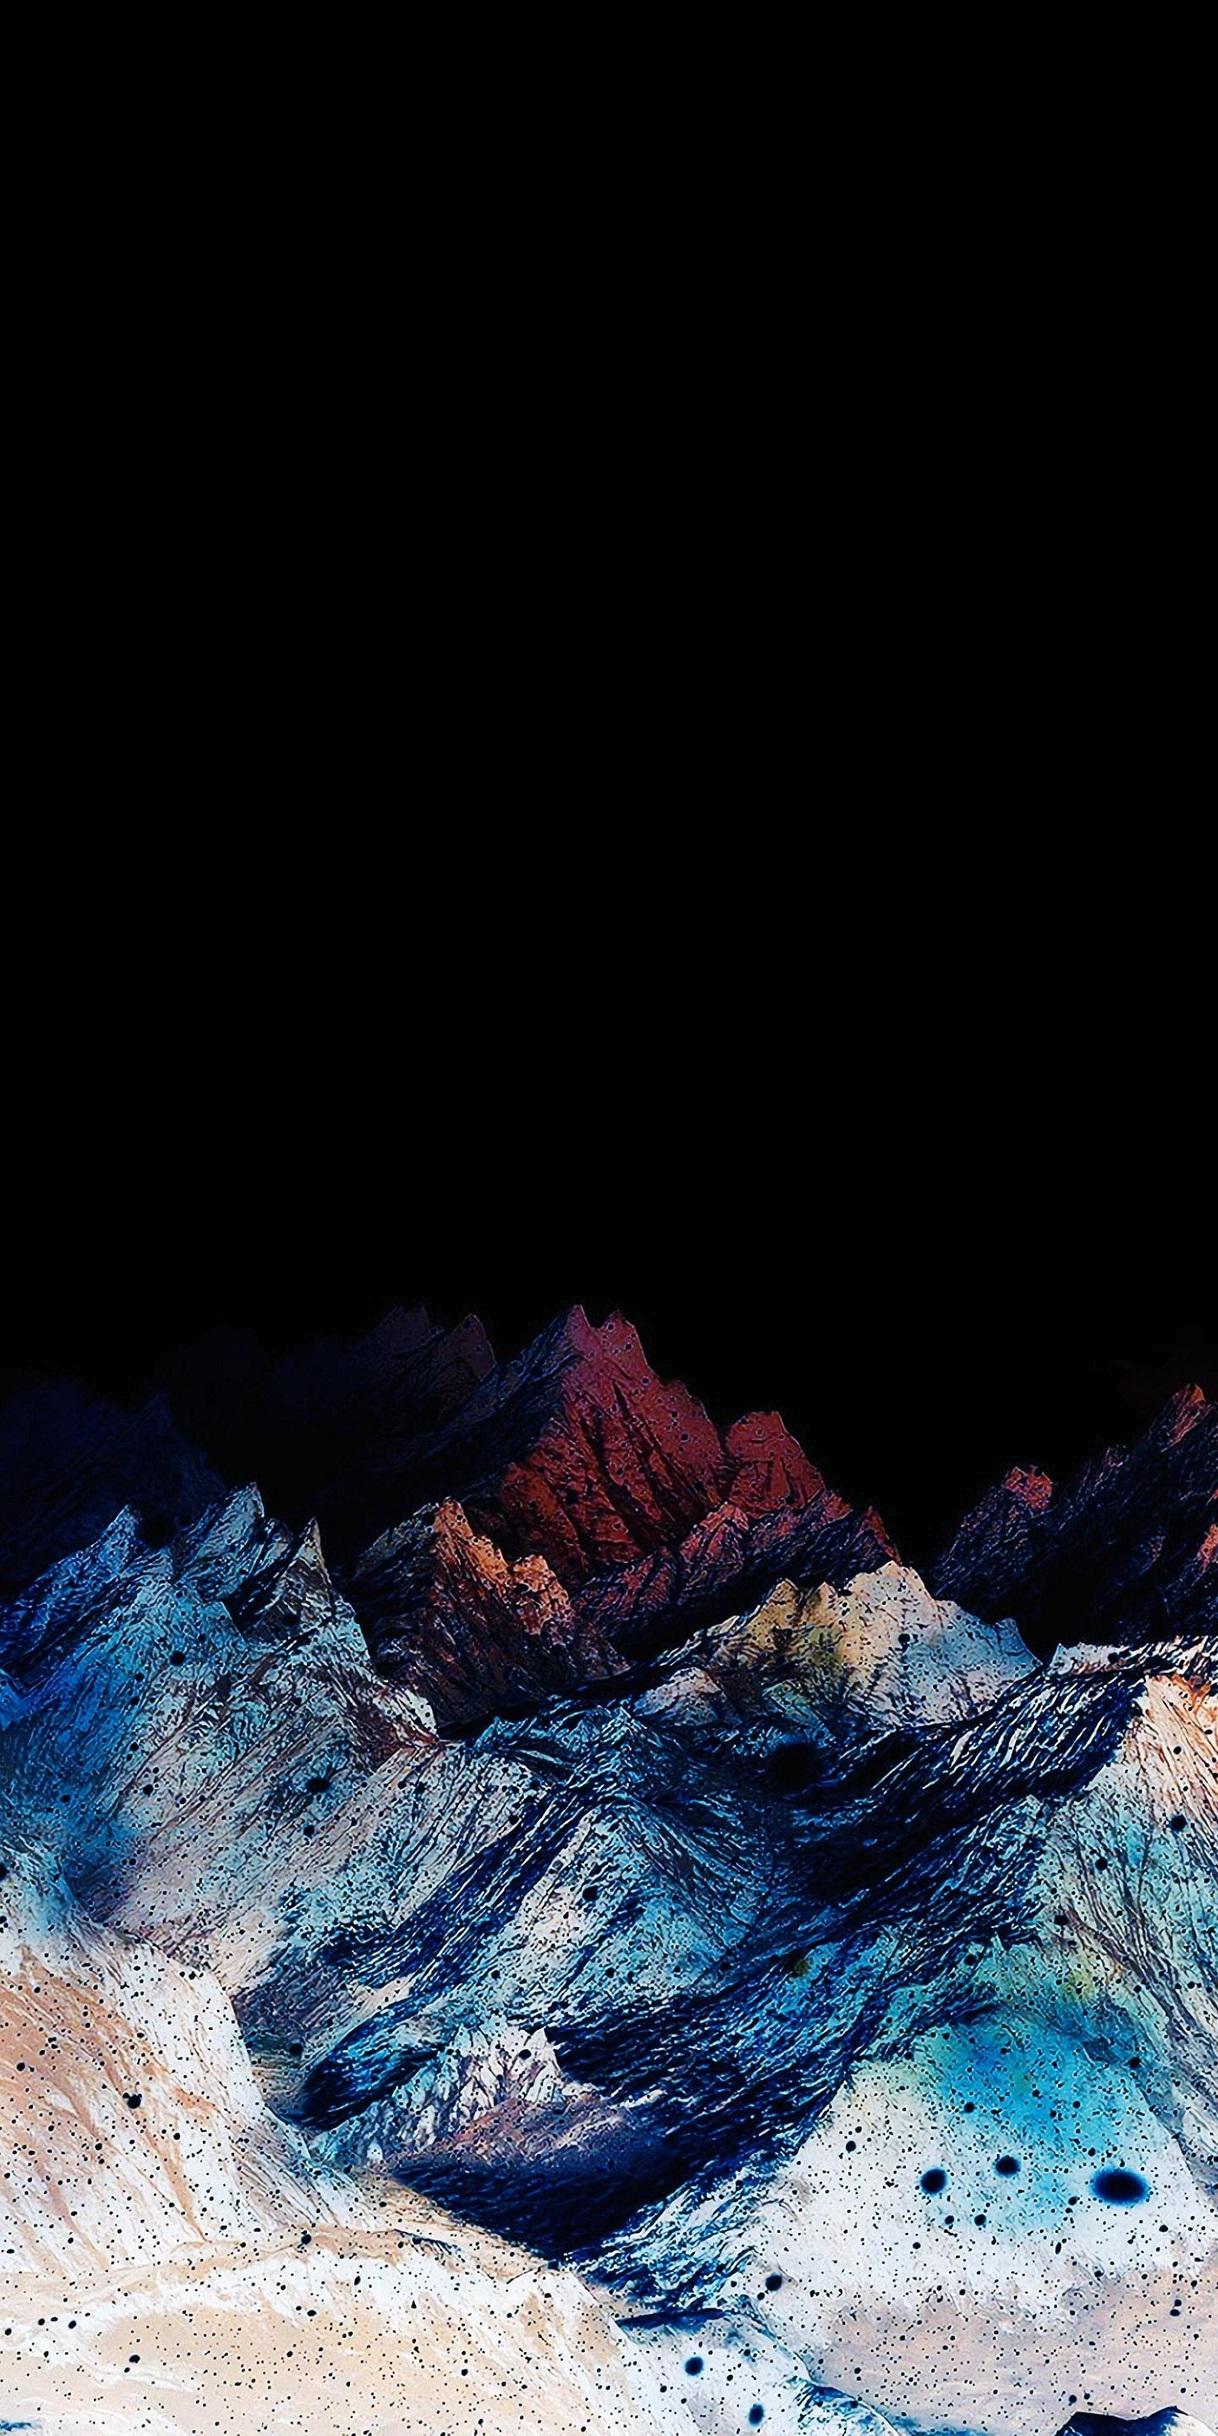 Iphone Xs Max Amoled Wallpapers